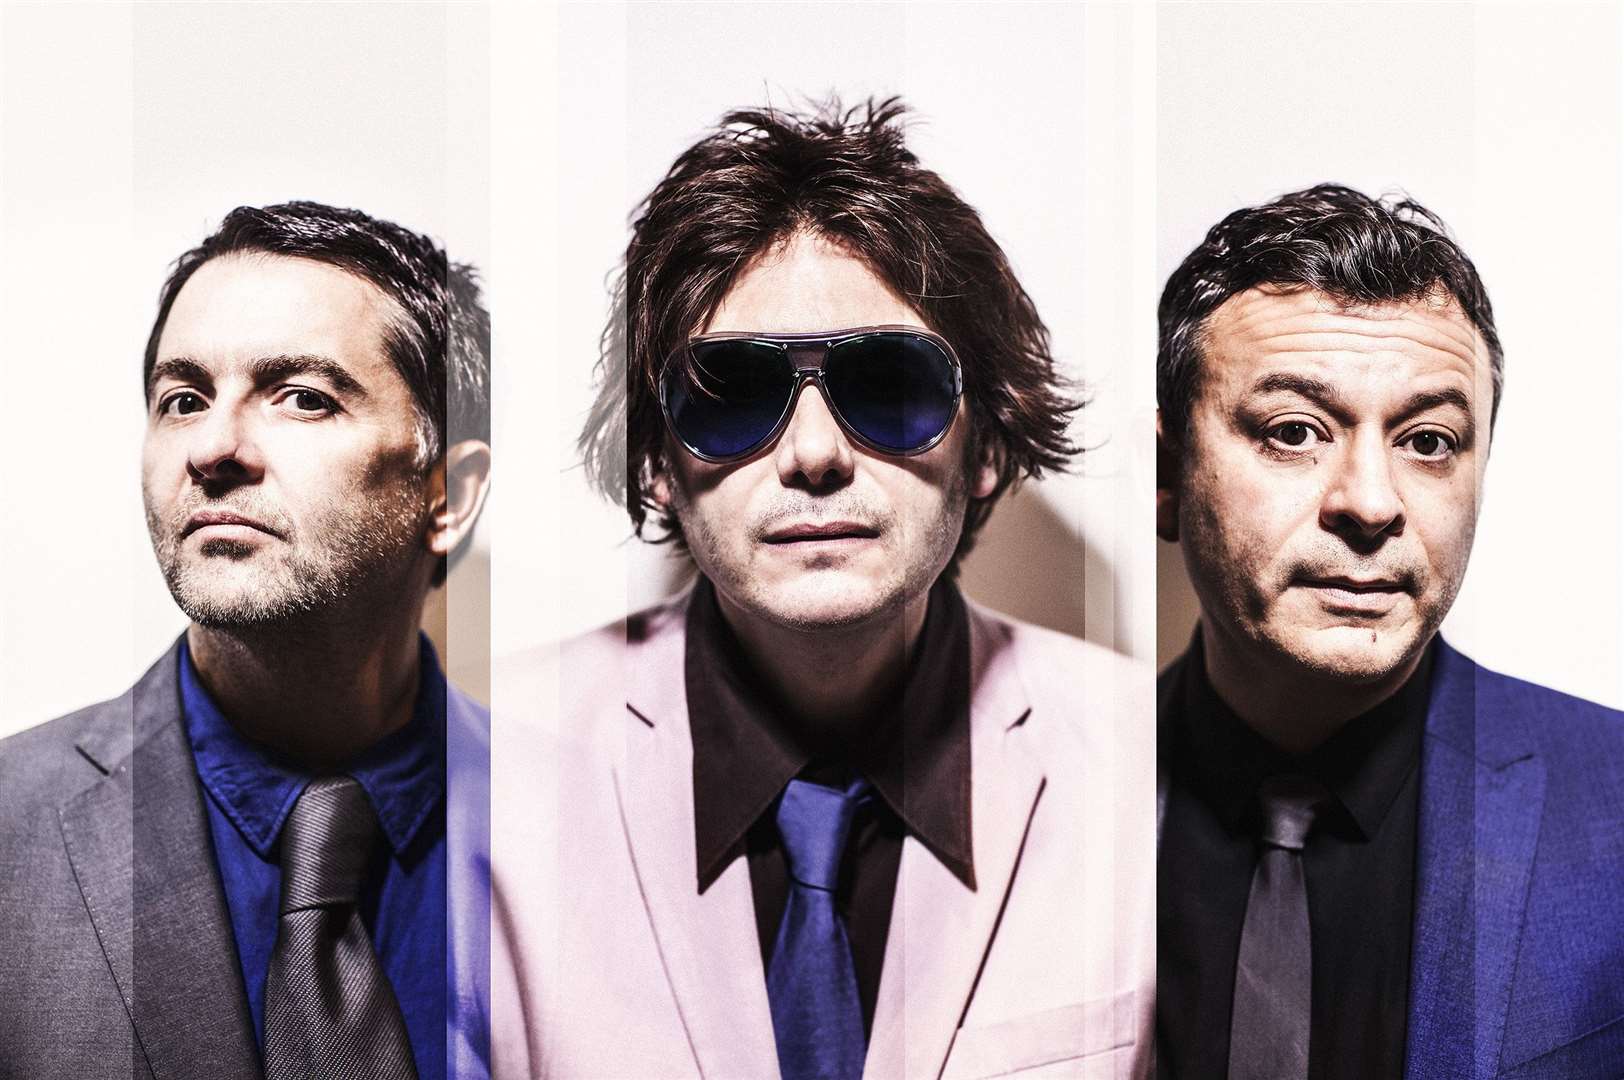 Manic Street Preachers now play huge festivals and stadiums around the world. Credit: Alex Lake